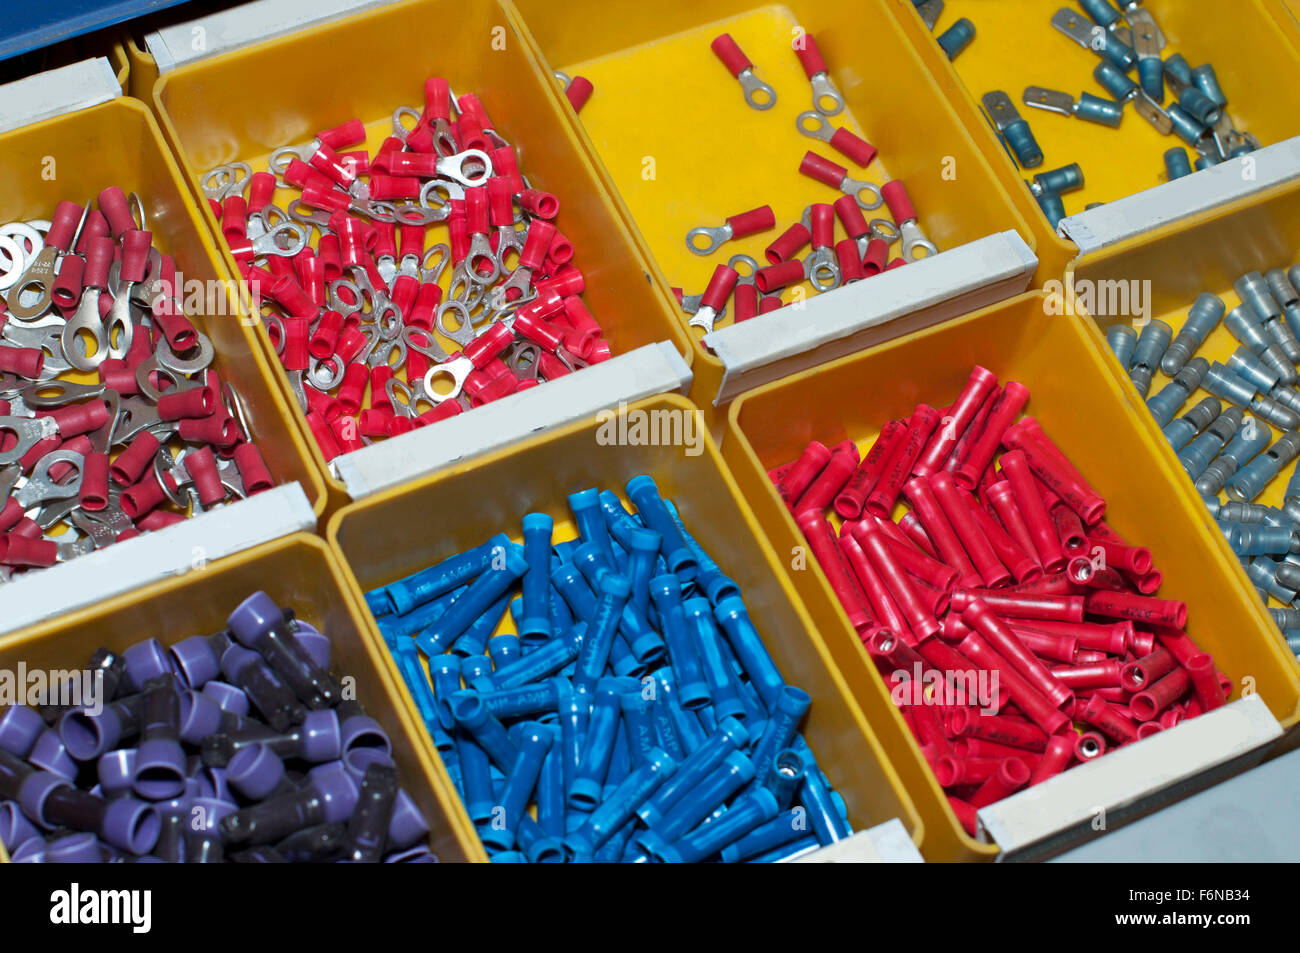 Different terminals in a spare parts store Stock Photo